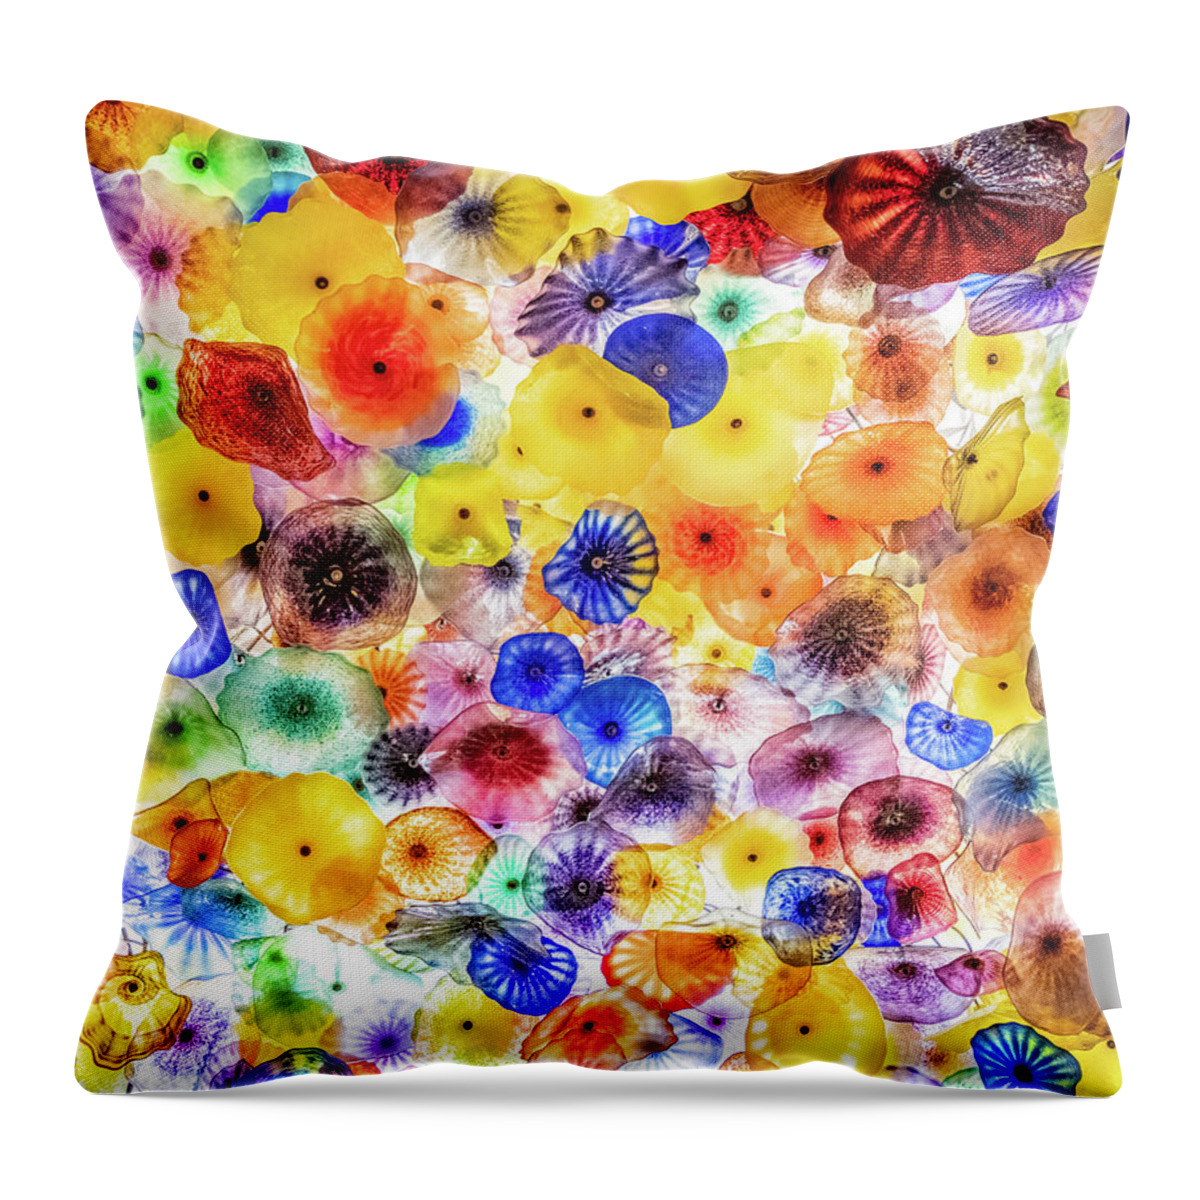 2019 Throw Pillow featuring the photograph Bellagio Ceiling by Gerri Bigler